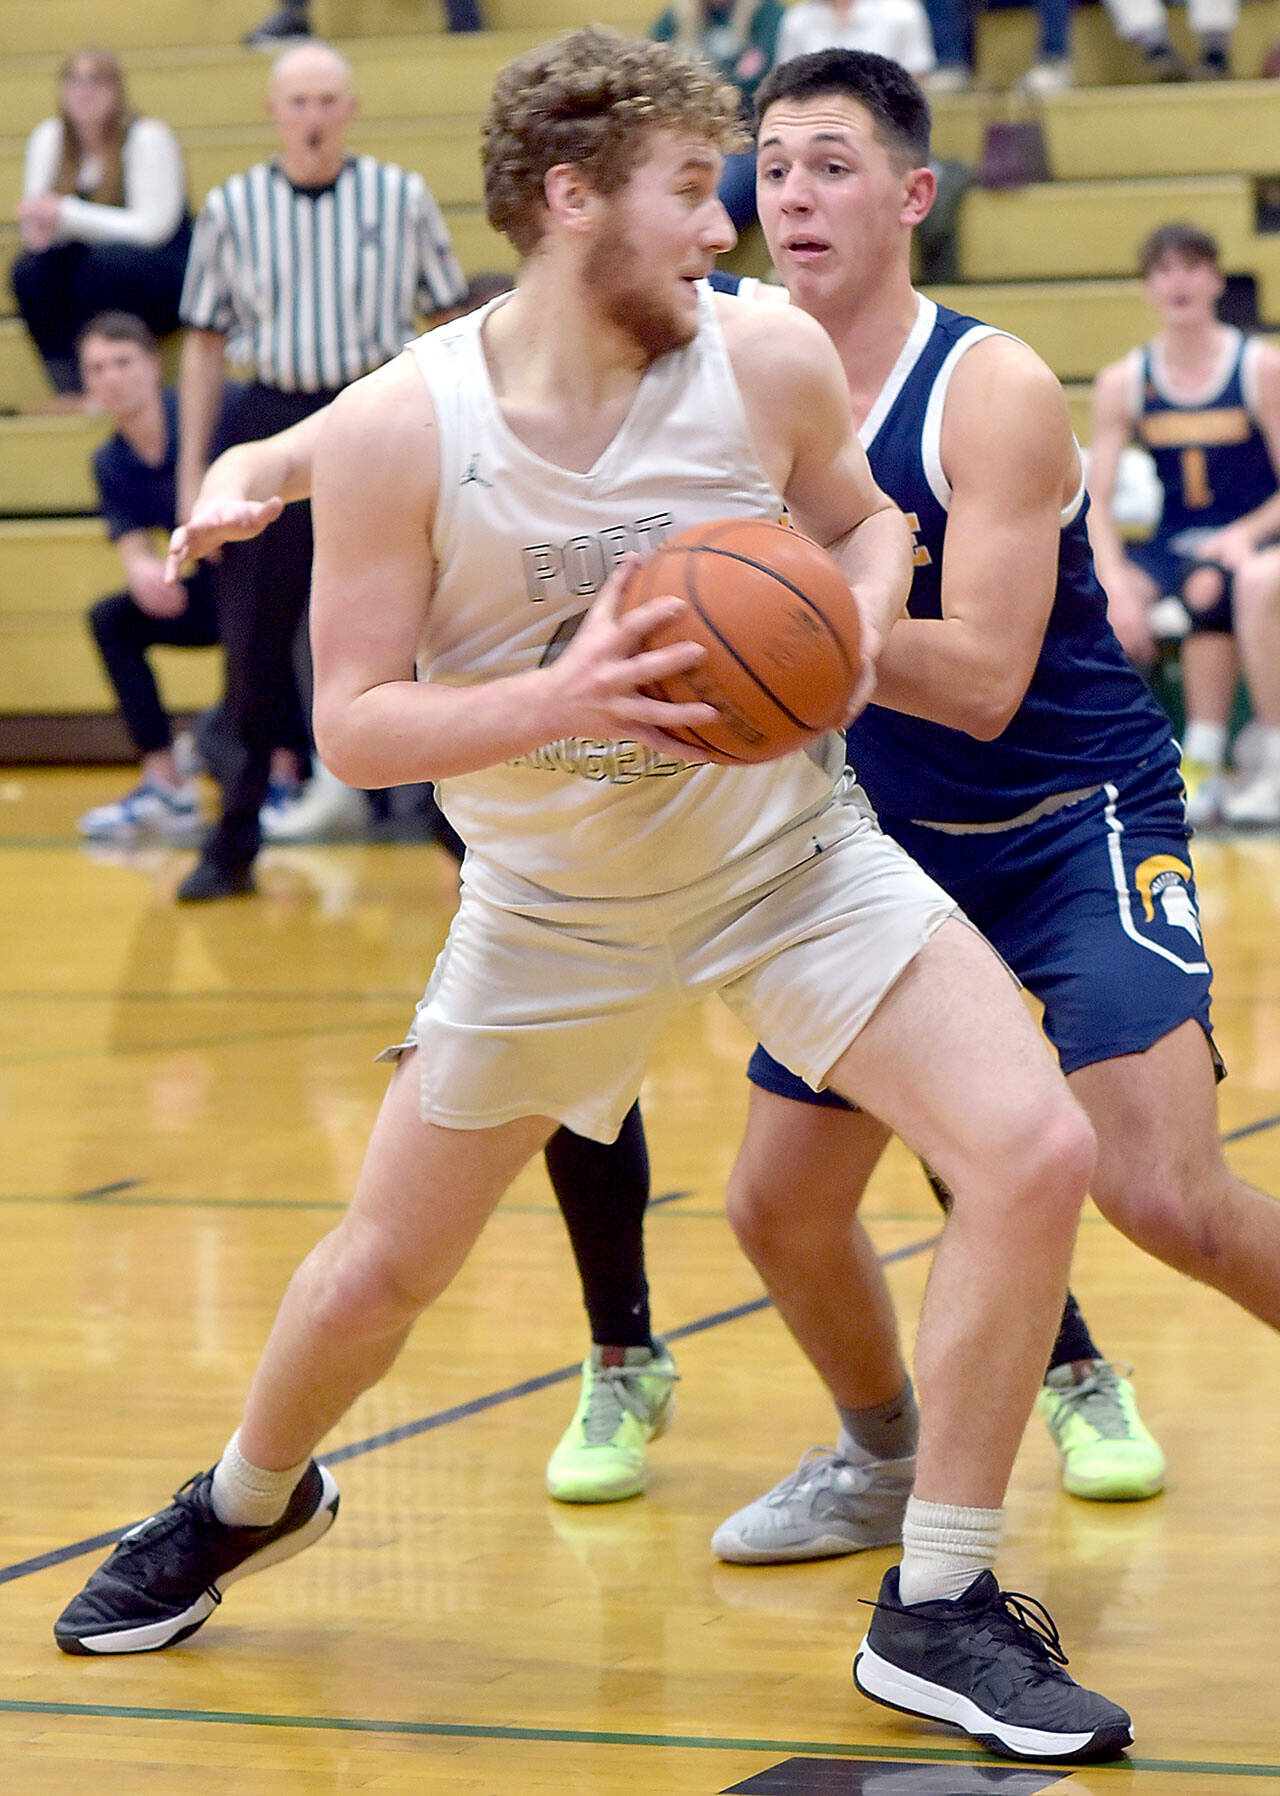 KEITH THORPE/PENINSULA DAILY NEWS Port Angeles’ Isaiah Shamp, front, picks his path to the lane as Bainbridge’s Will Rohrbacher tries to hold him off on Thursday in Port Angeles.